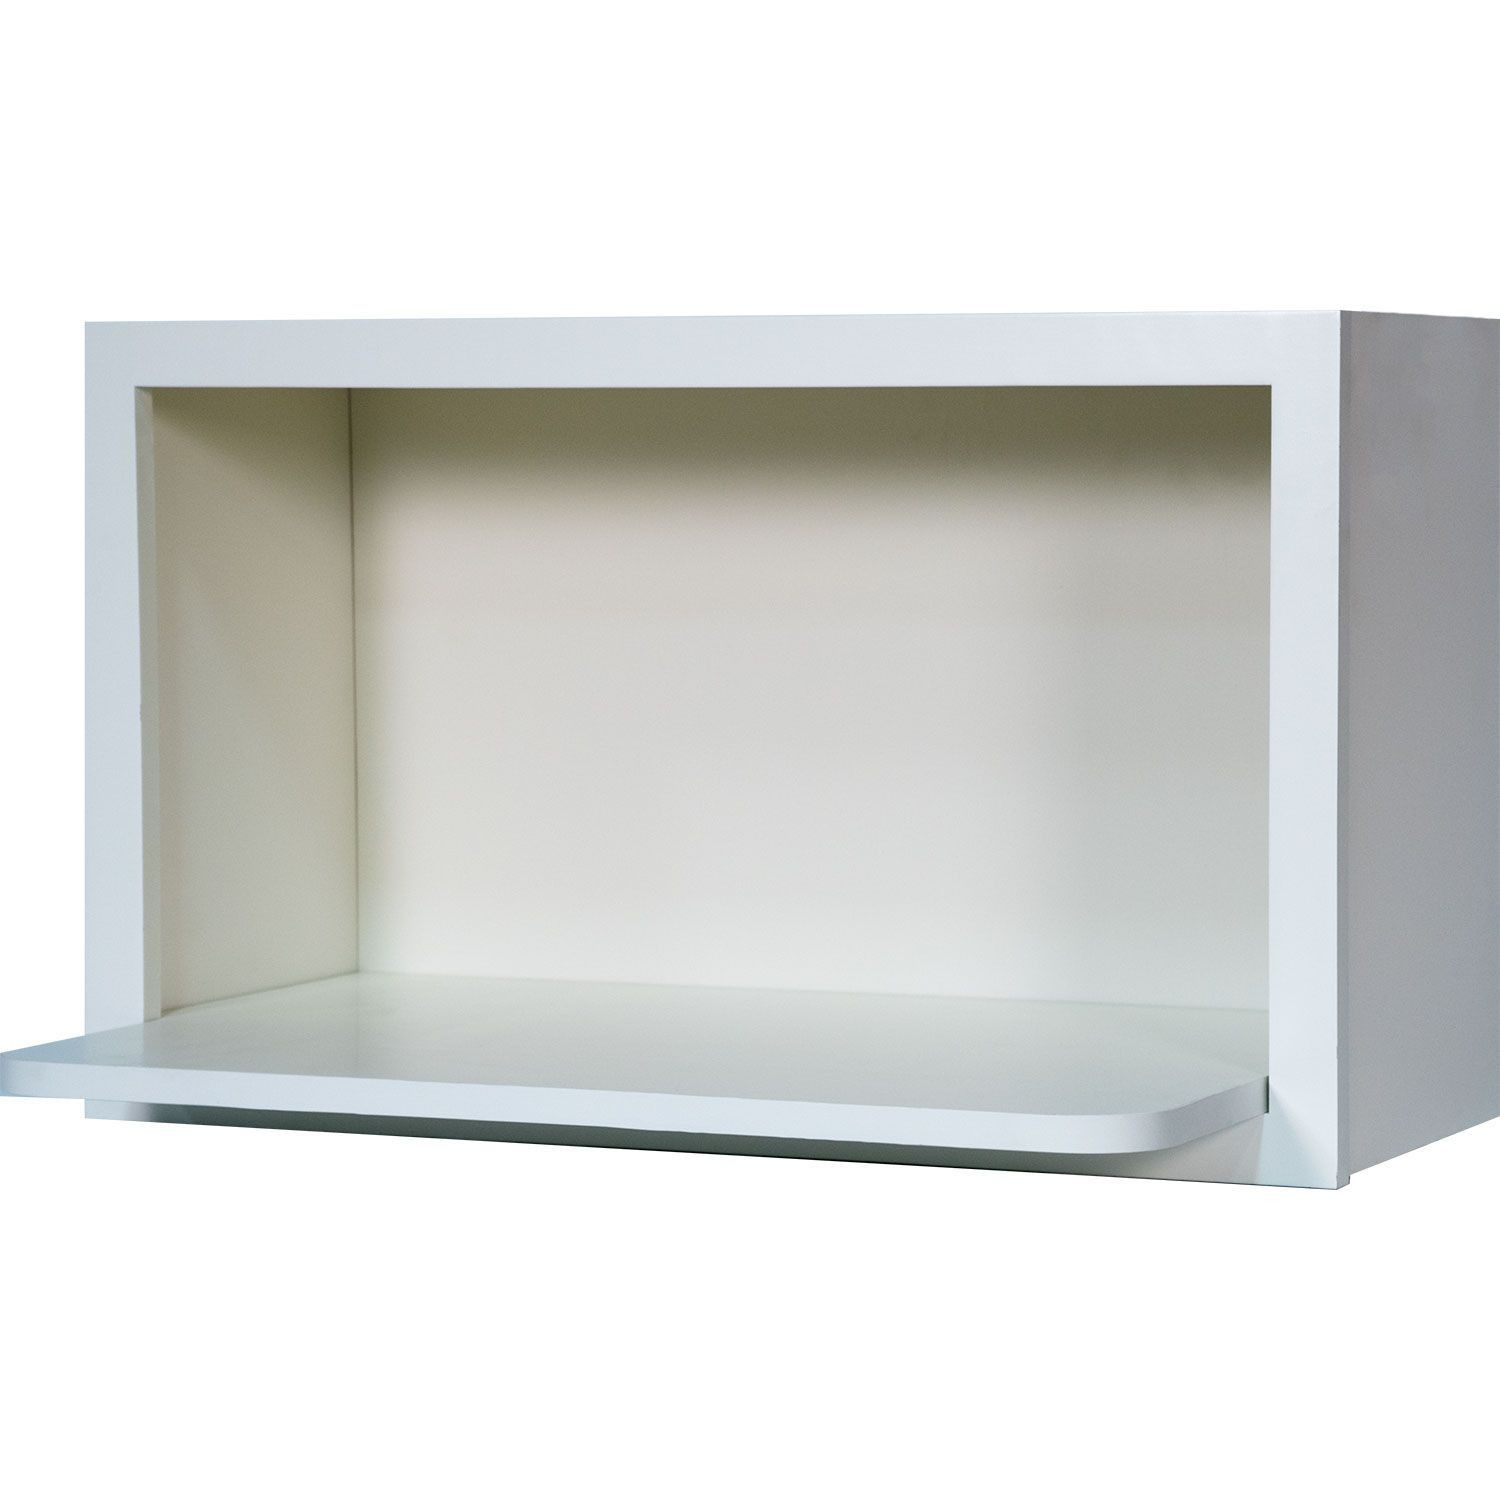 Kitchen Cabinet With Microwave Shelf
 30 Inch Microwave Shelf Wall Cabinet in Shaker White 30